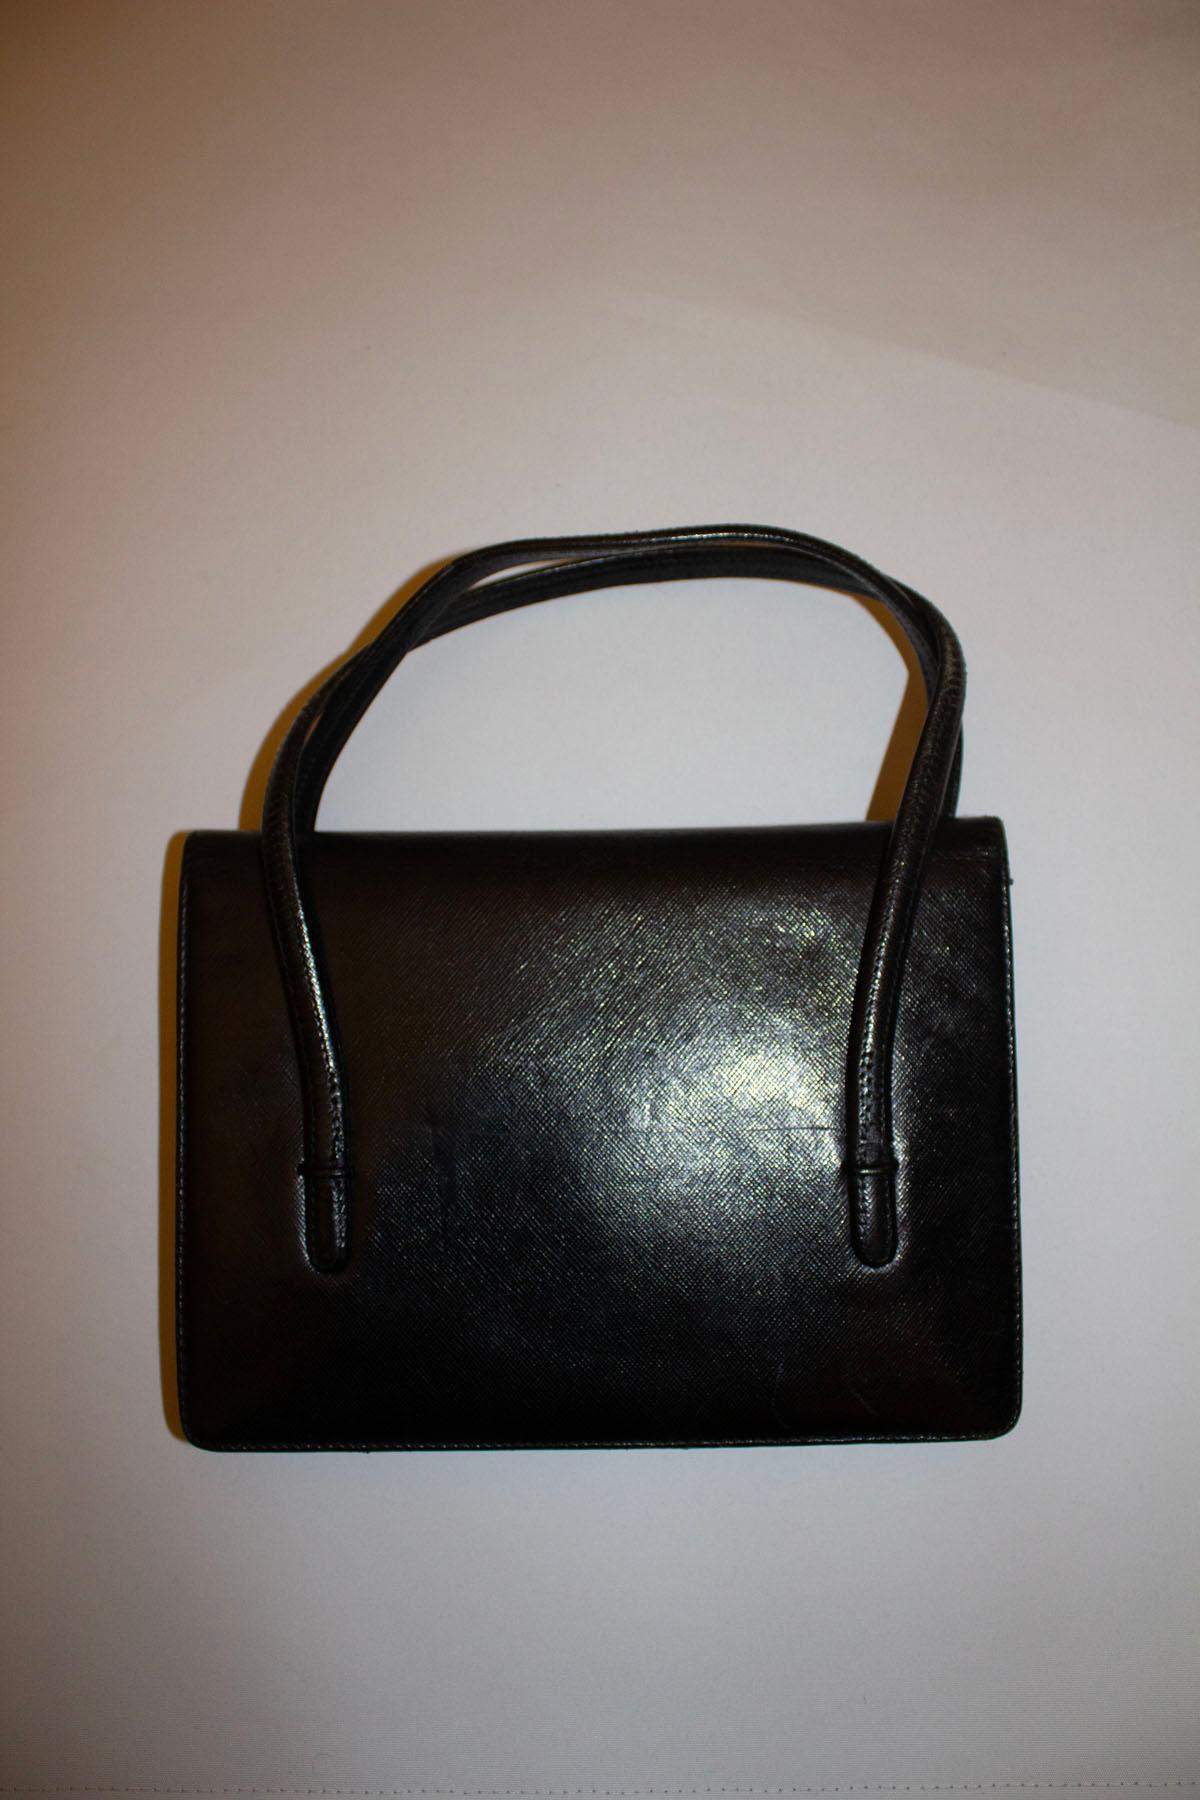 Vintage Gucci Black Leather Top  Handle Handbag In Good Condition For Sale In London, GB